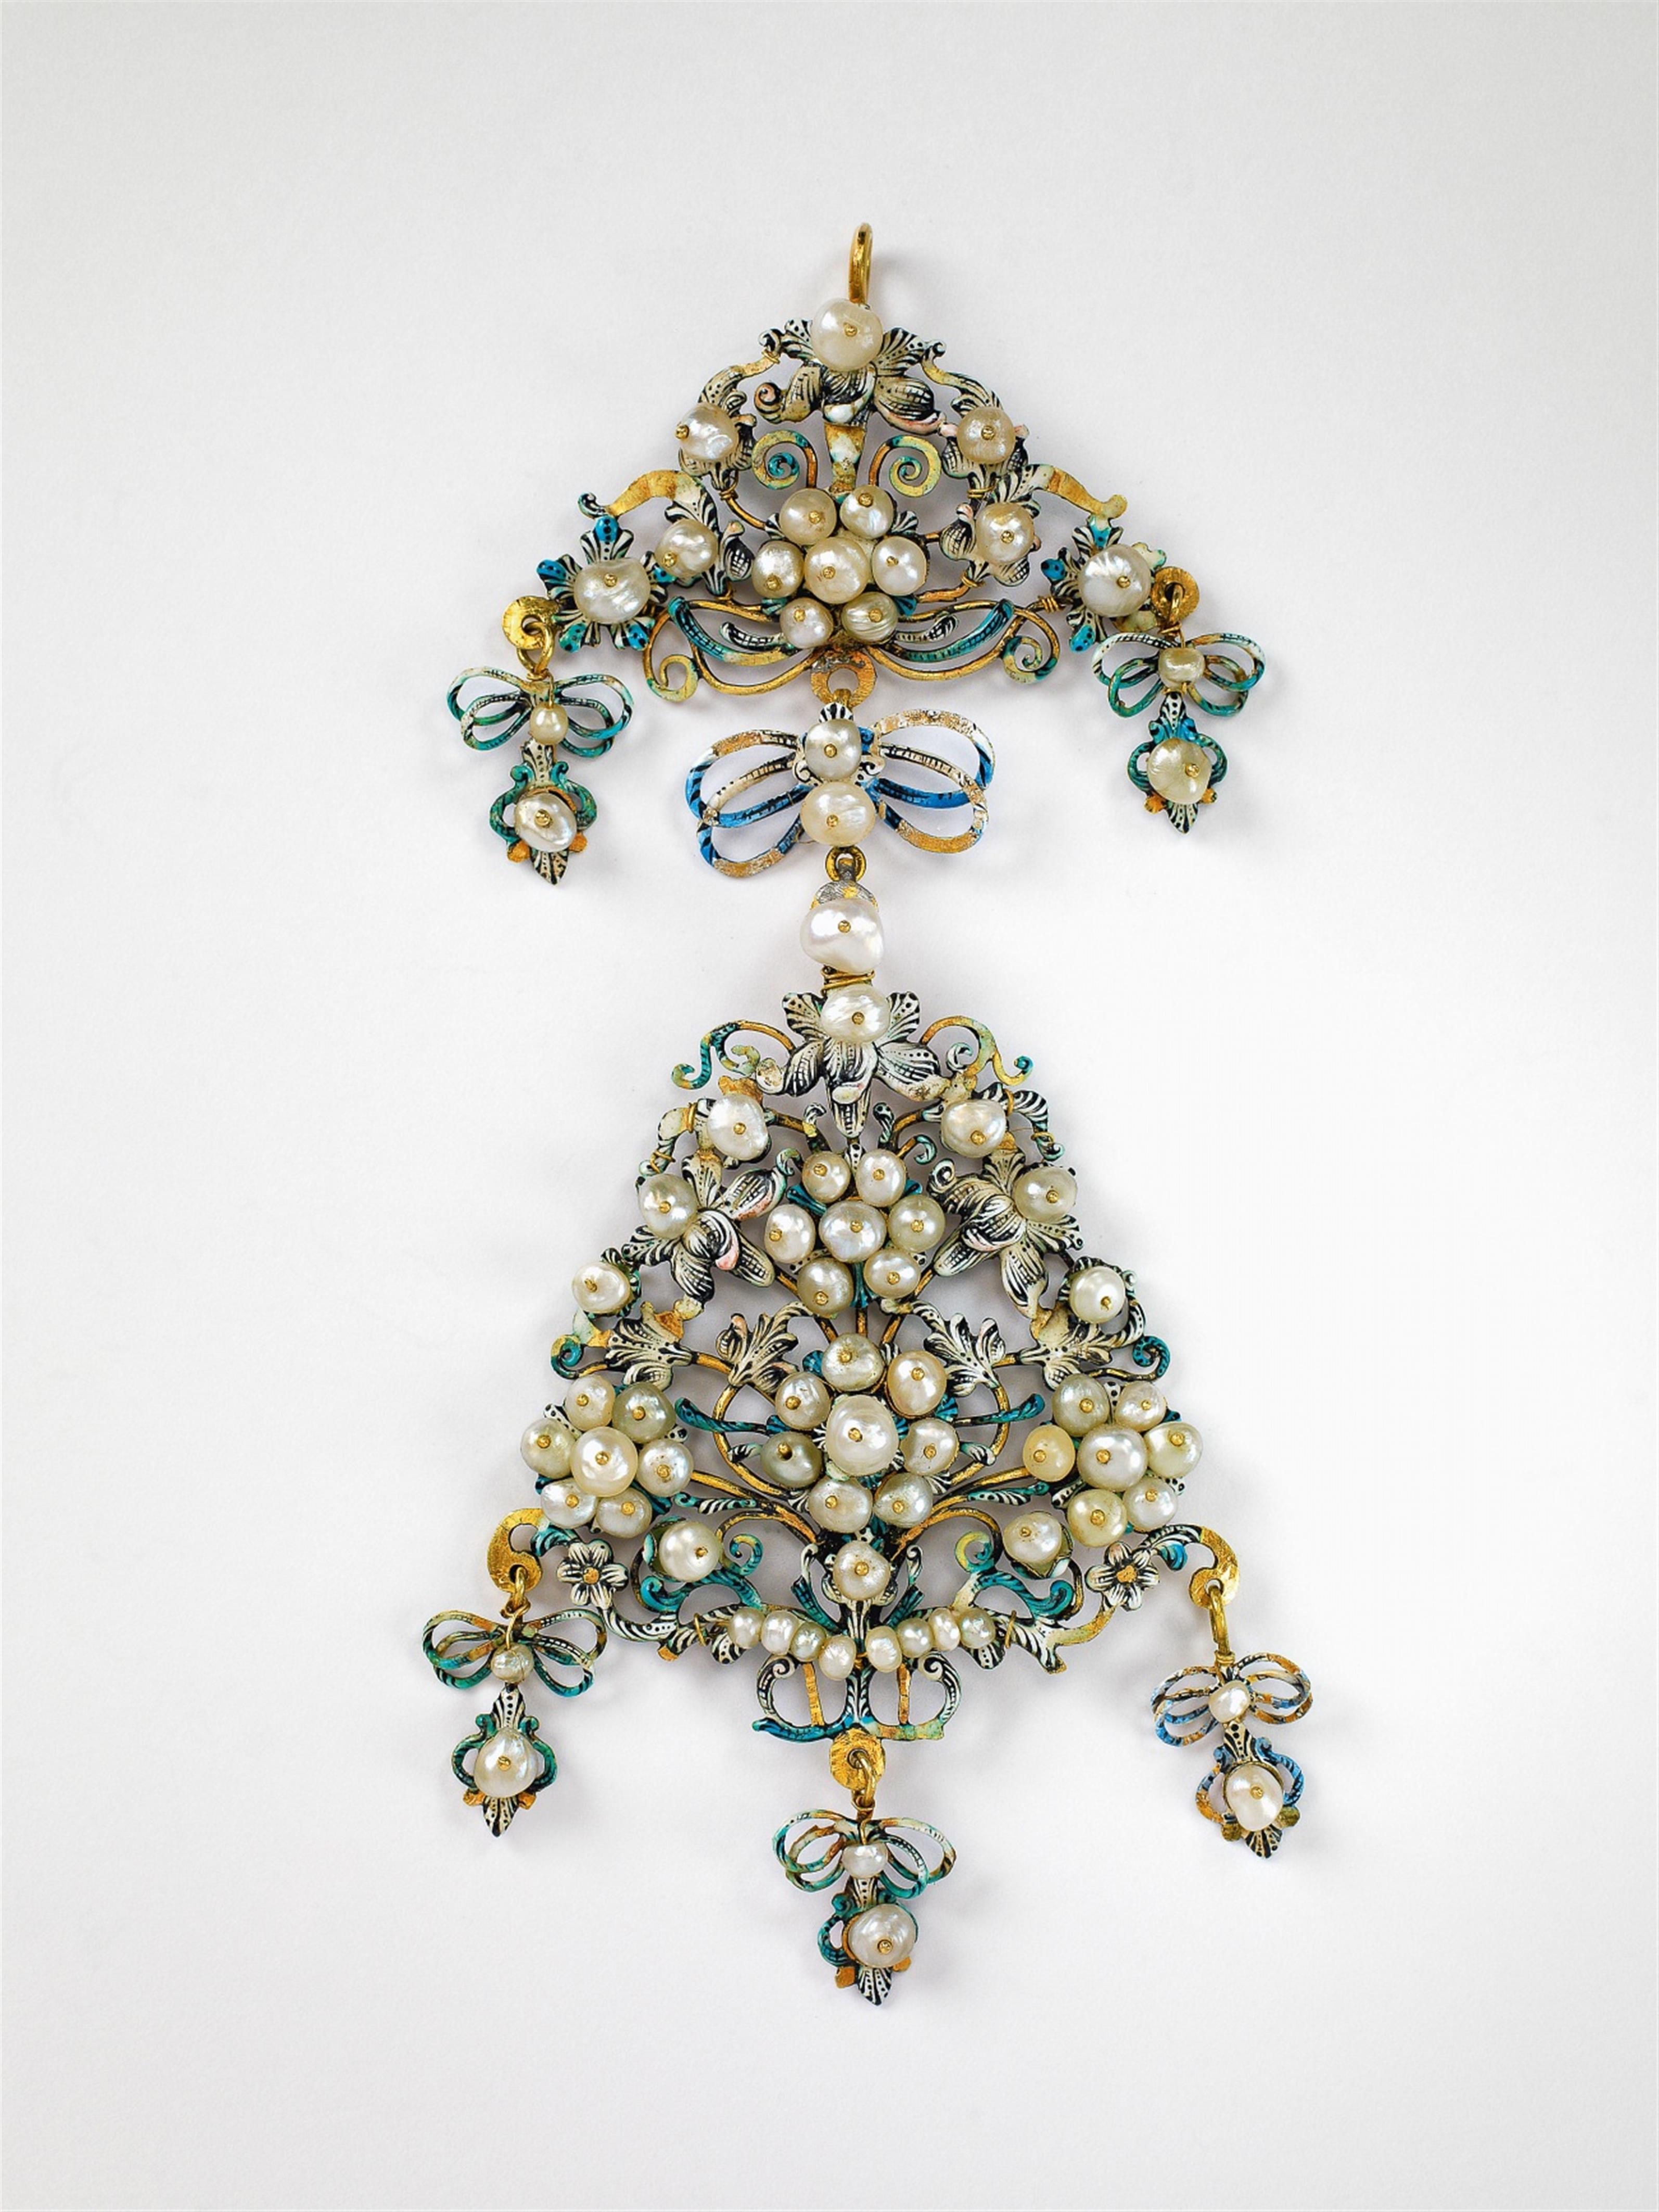 An 18k gold, enamel and pearl Baroque corsage pendant - image-1